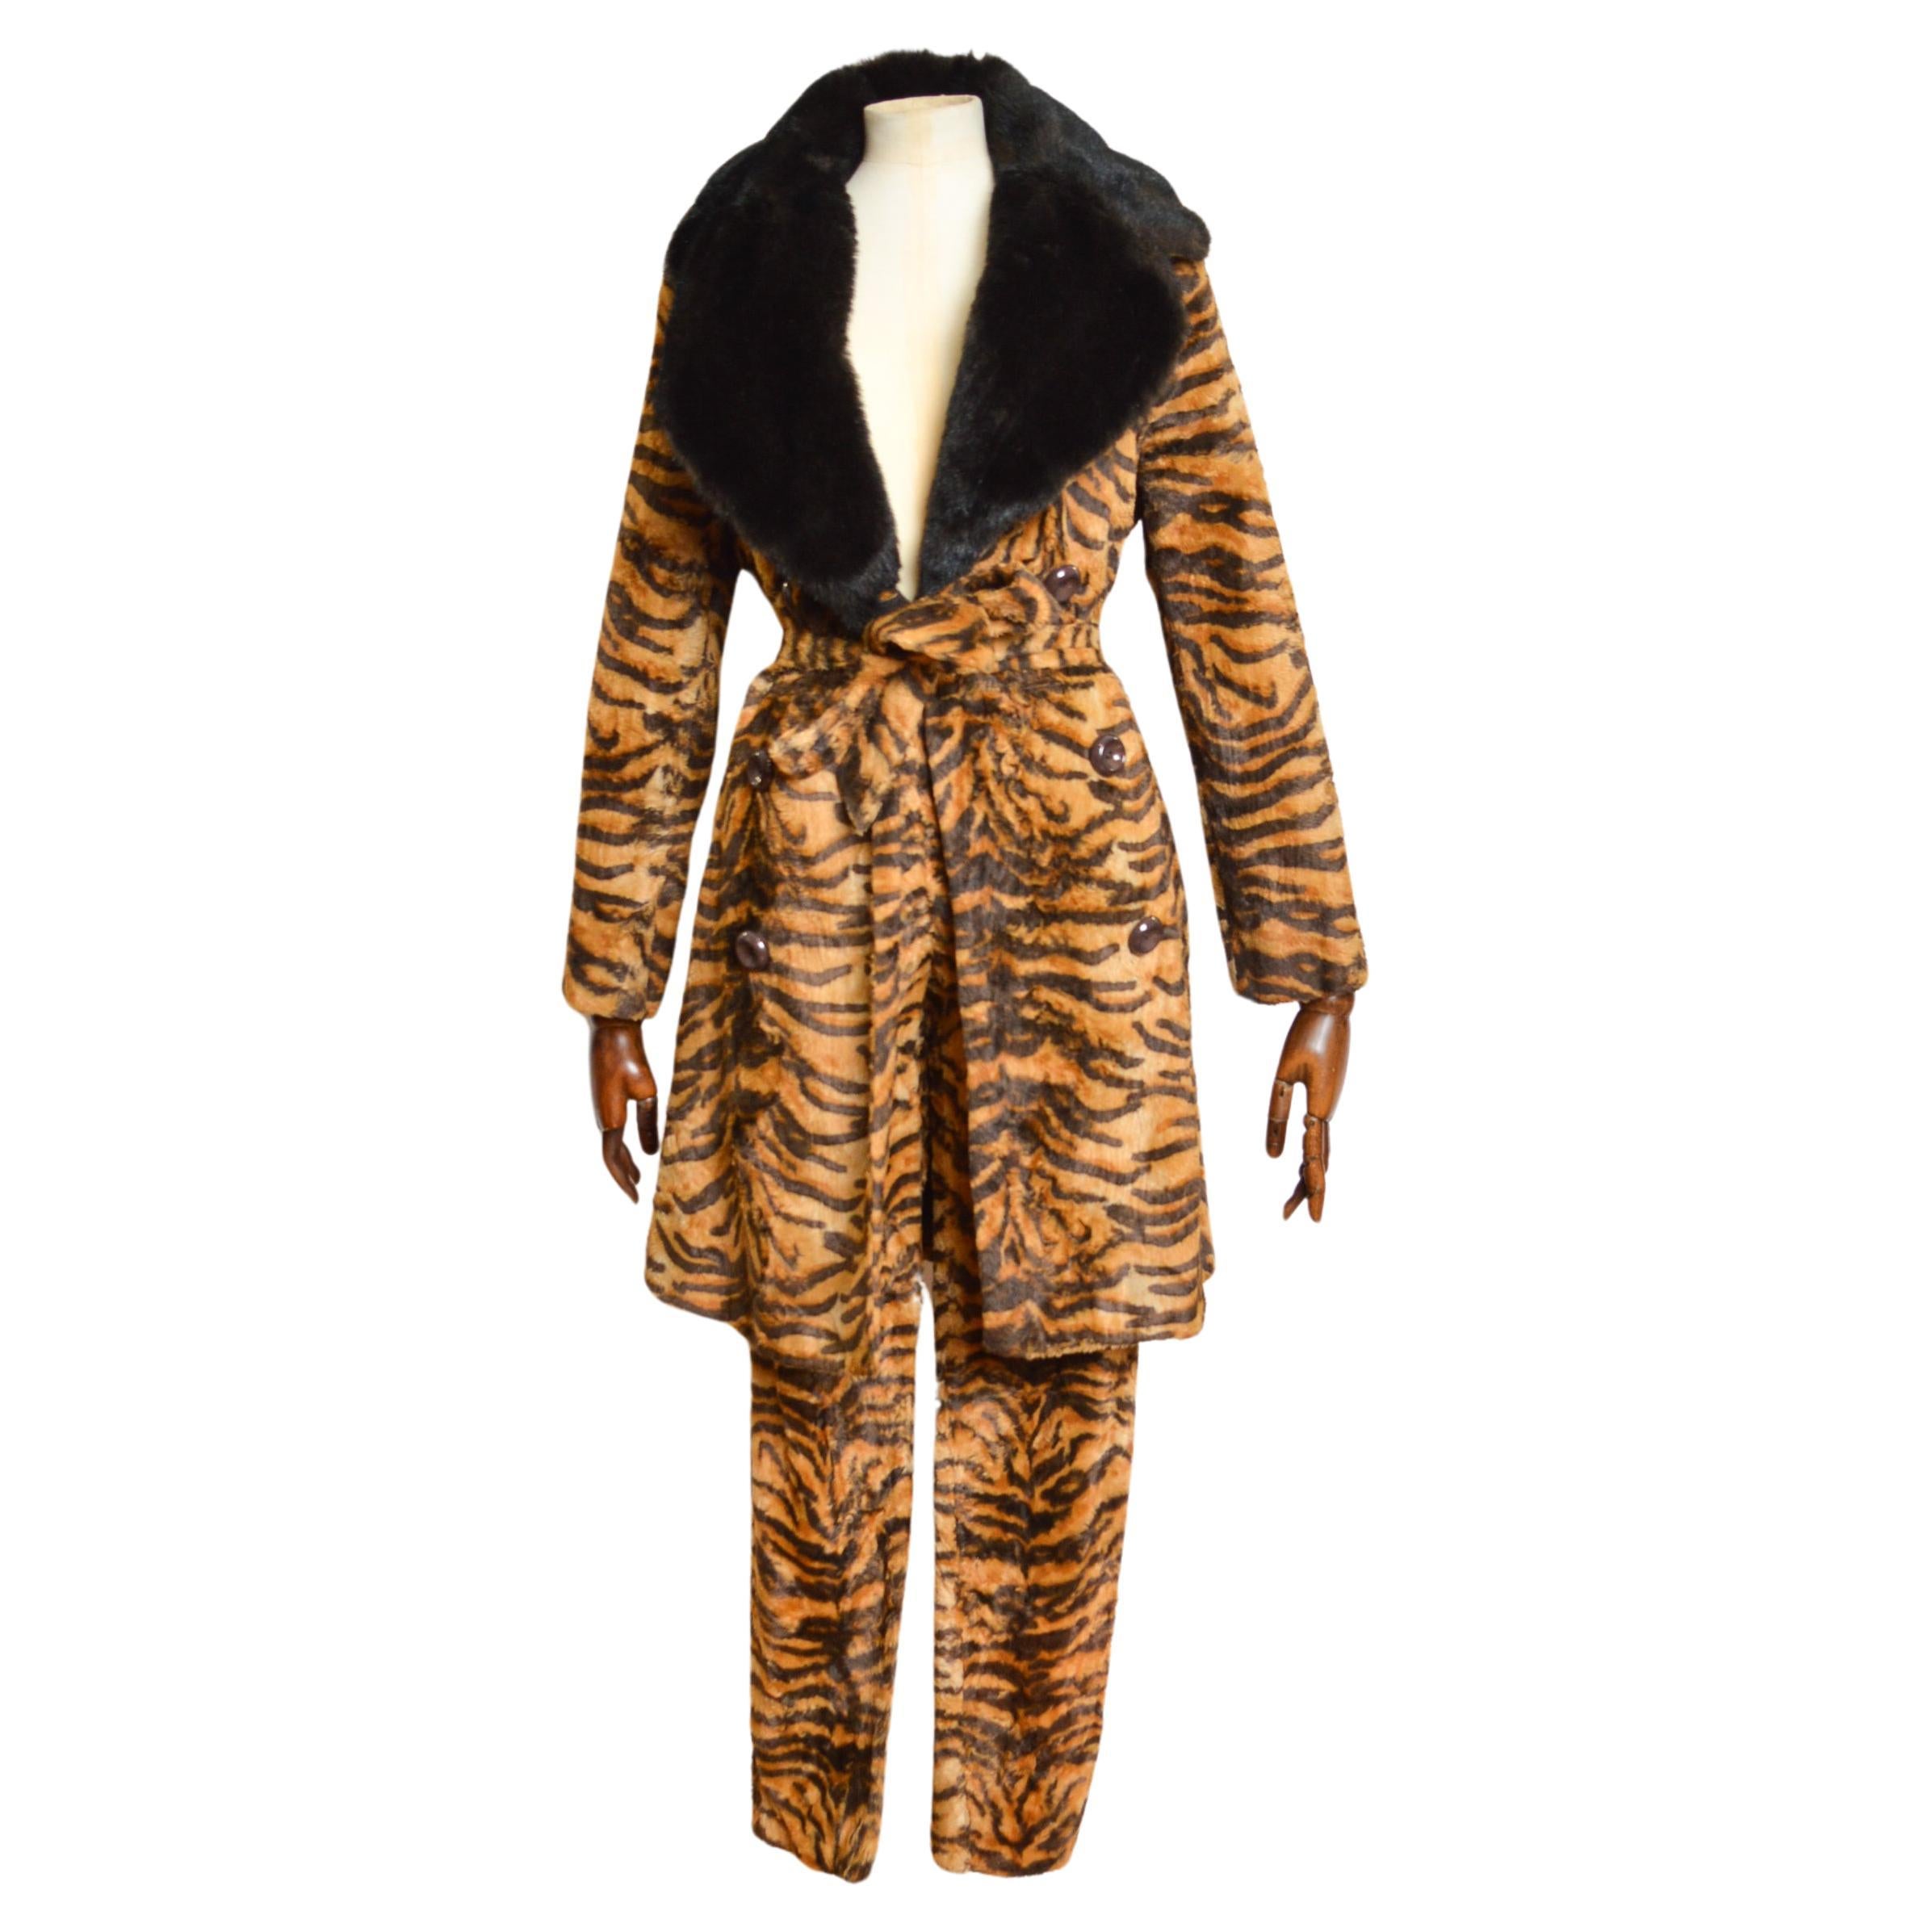 Early 1990's DOLCE & GABBANA Tiger Print Faux Fur Jacket Pants Suit Matching Set For Sale